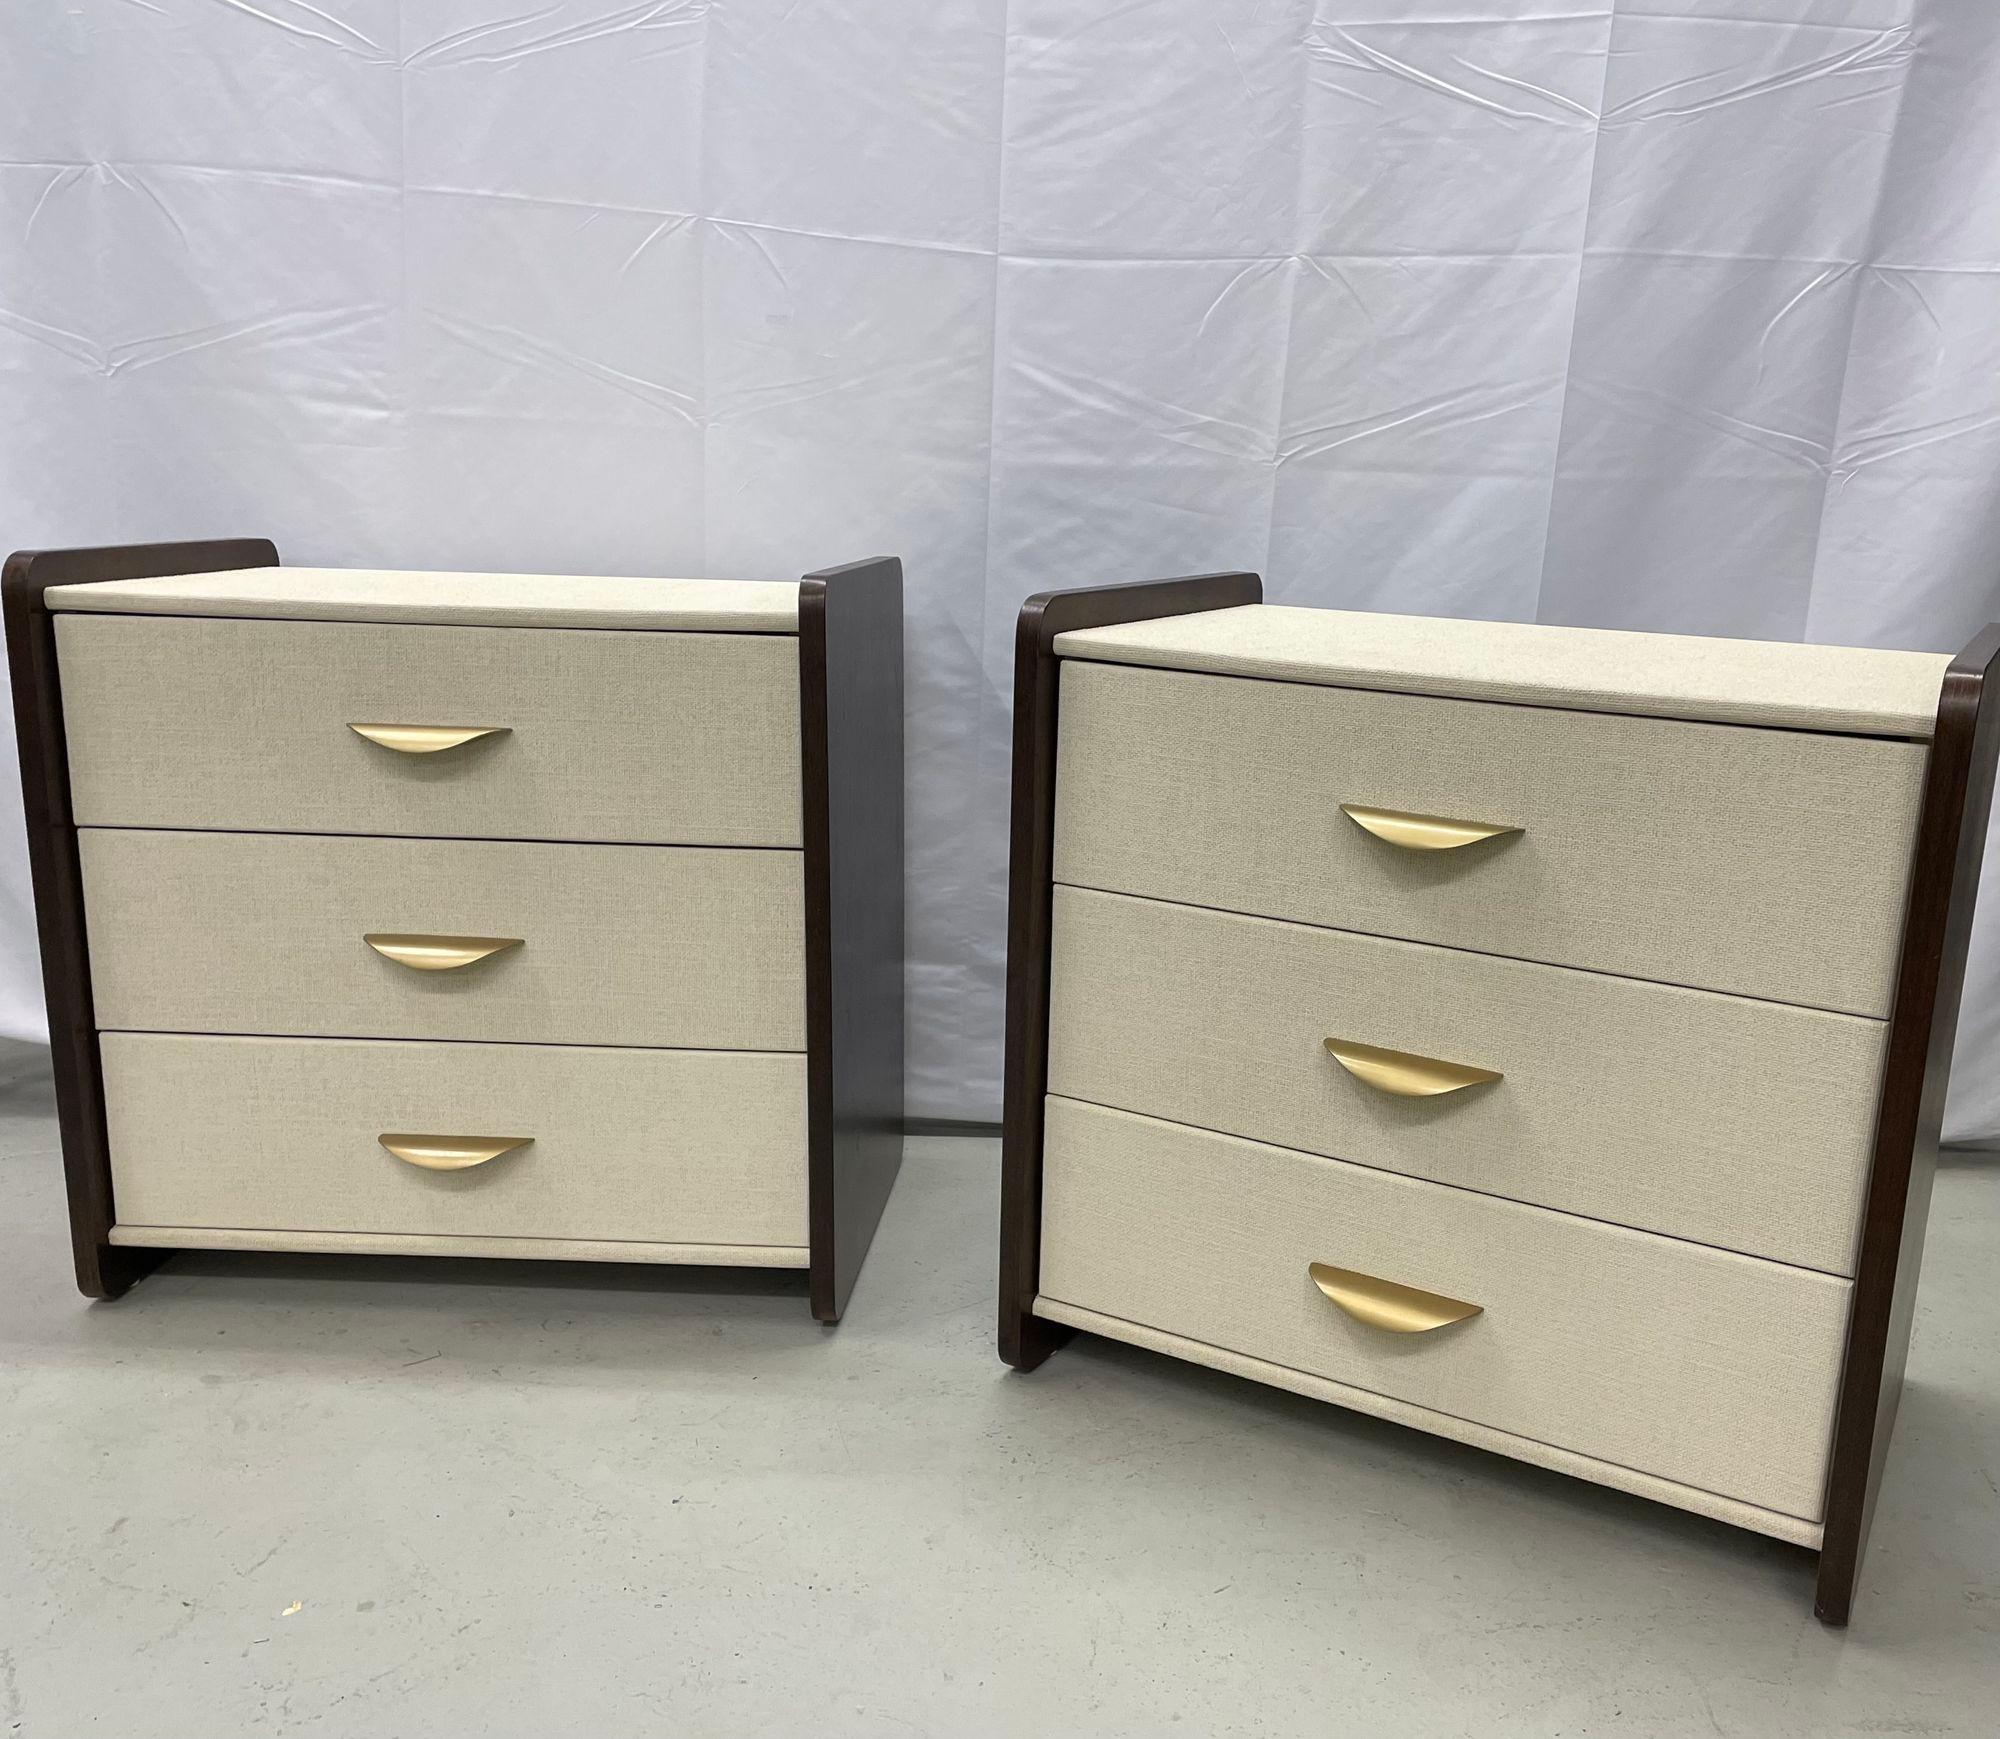 Pair of modern linen chest, nightstands, dressers, walnut, custom American.
Custom quality pair of three drawer modern decorative cabinets. Each on floating sides, hand wrapped in linen and given a multi-layered paint glaze in a neutral oyster